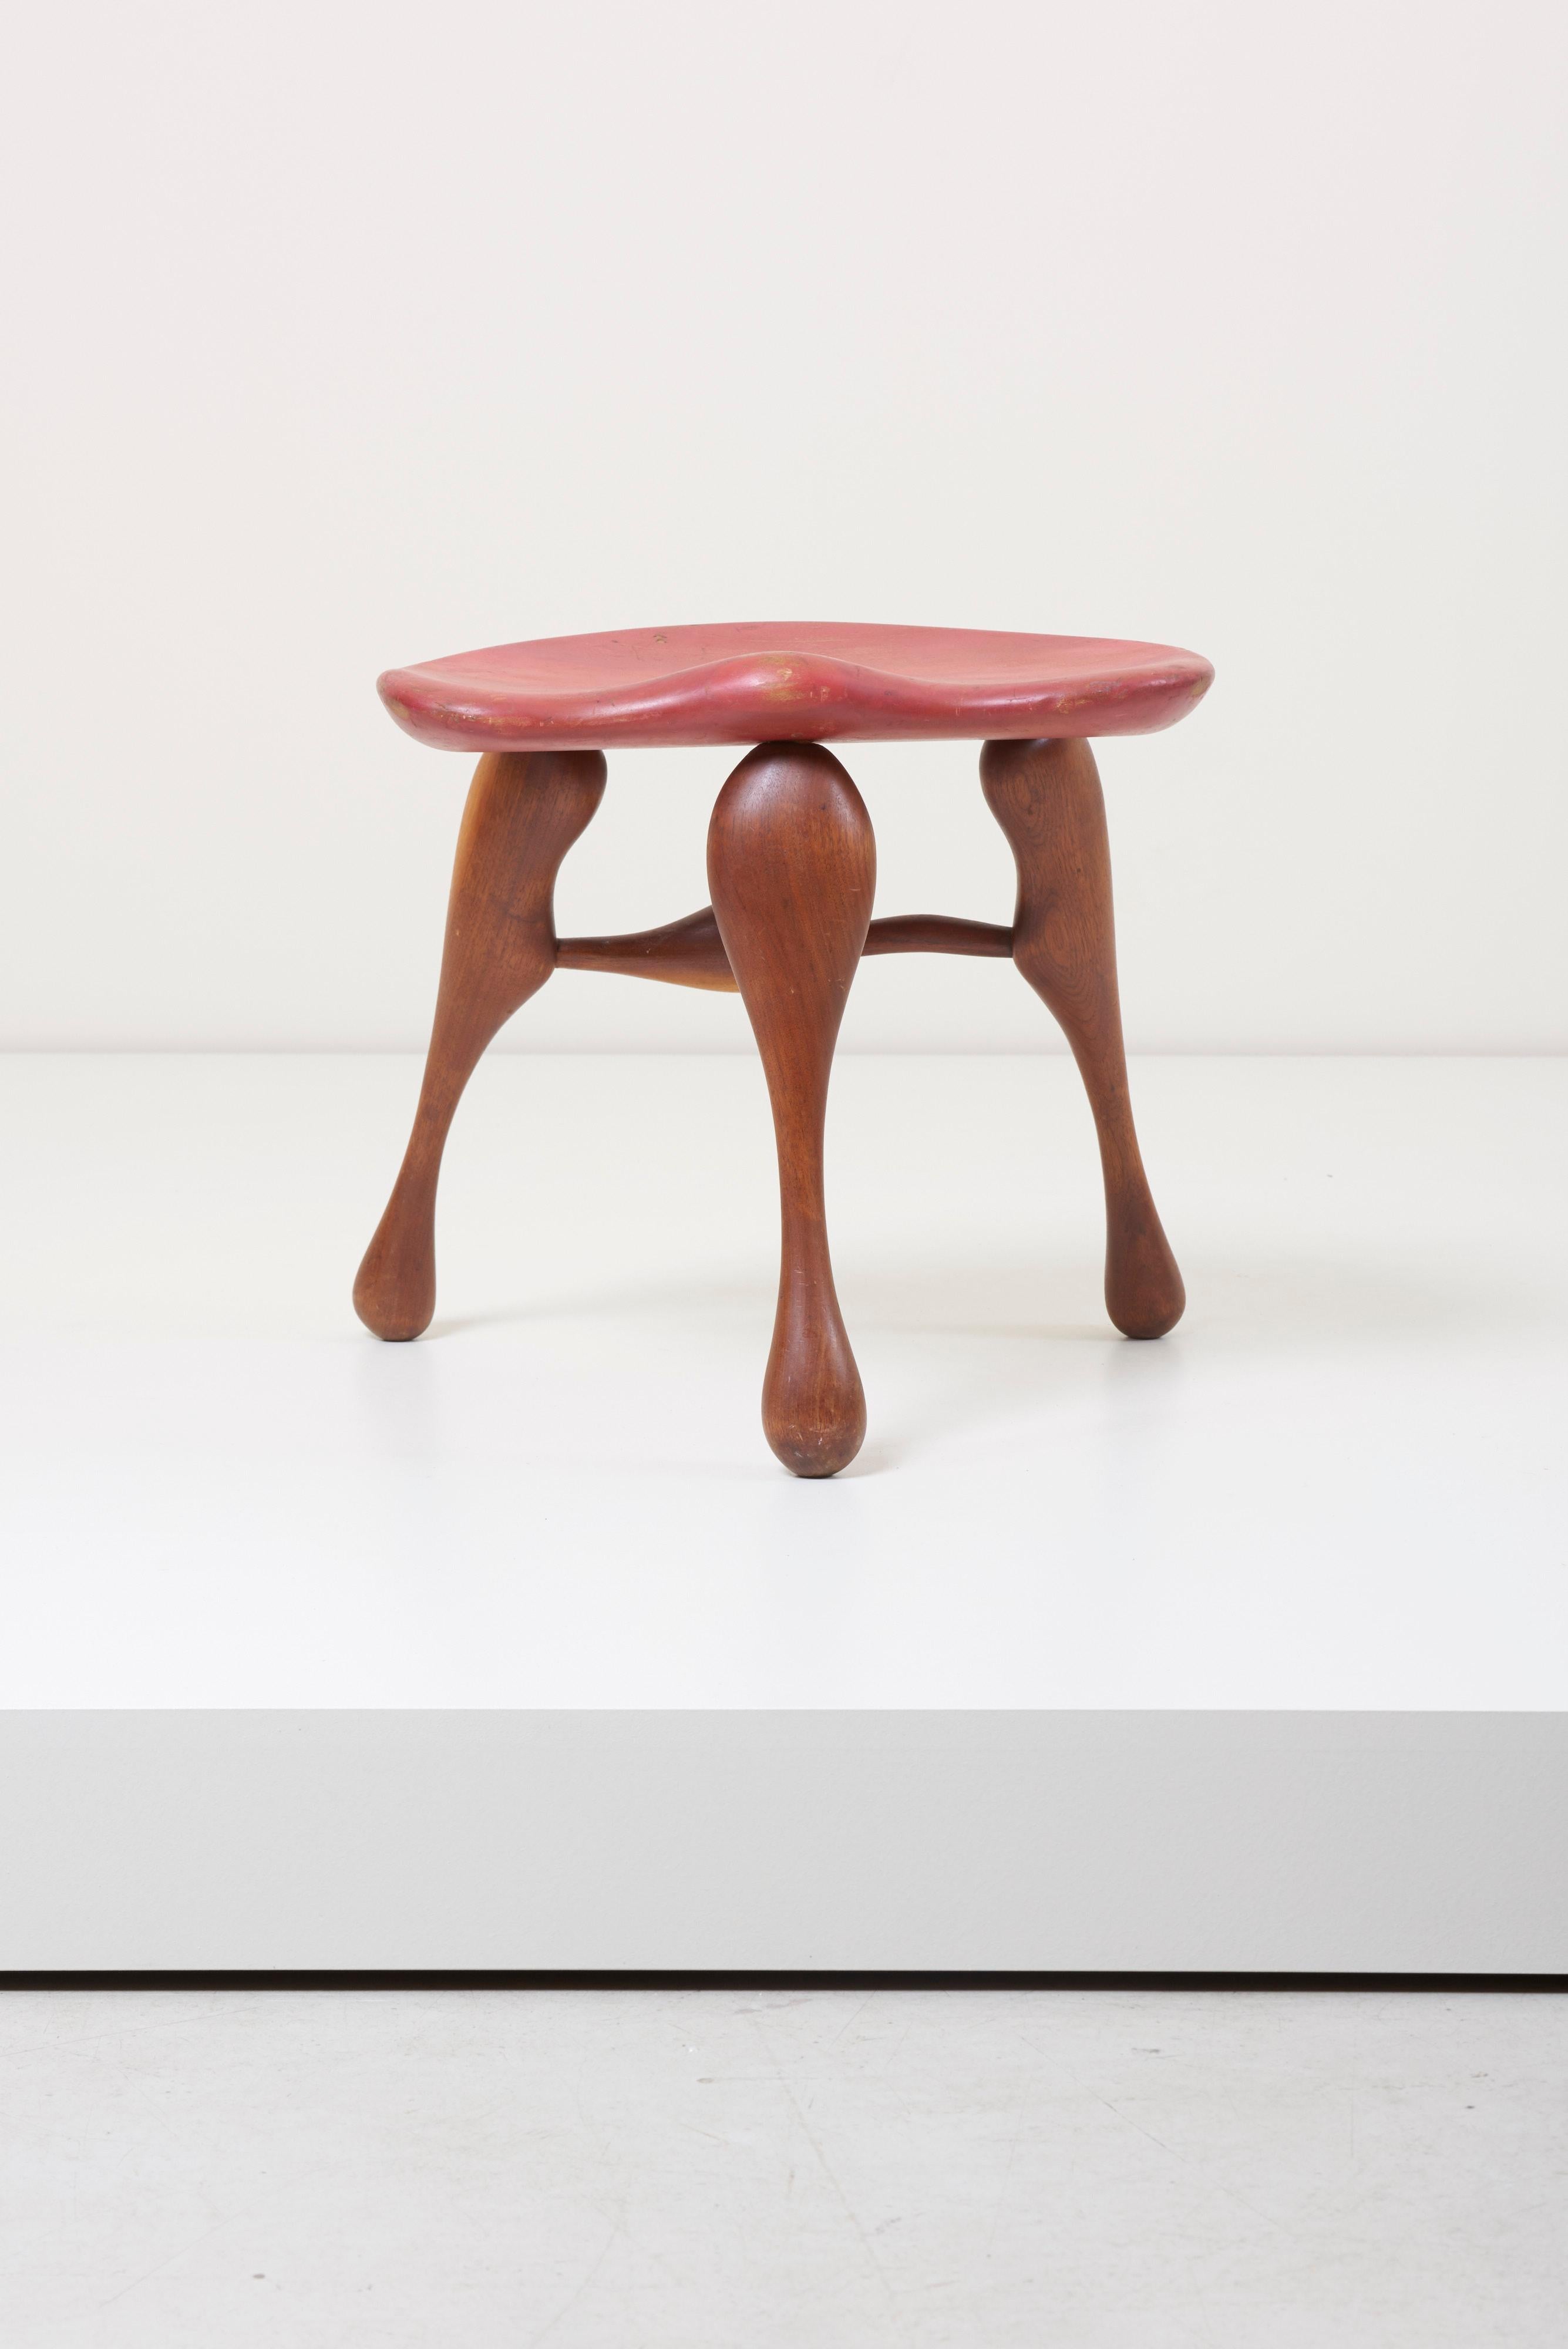 American Studio Craft Wooden Stool by Ron Curtis, US, 1950s